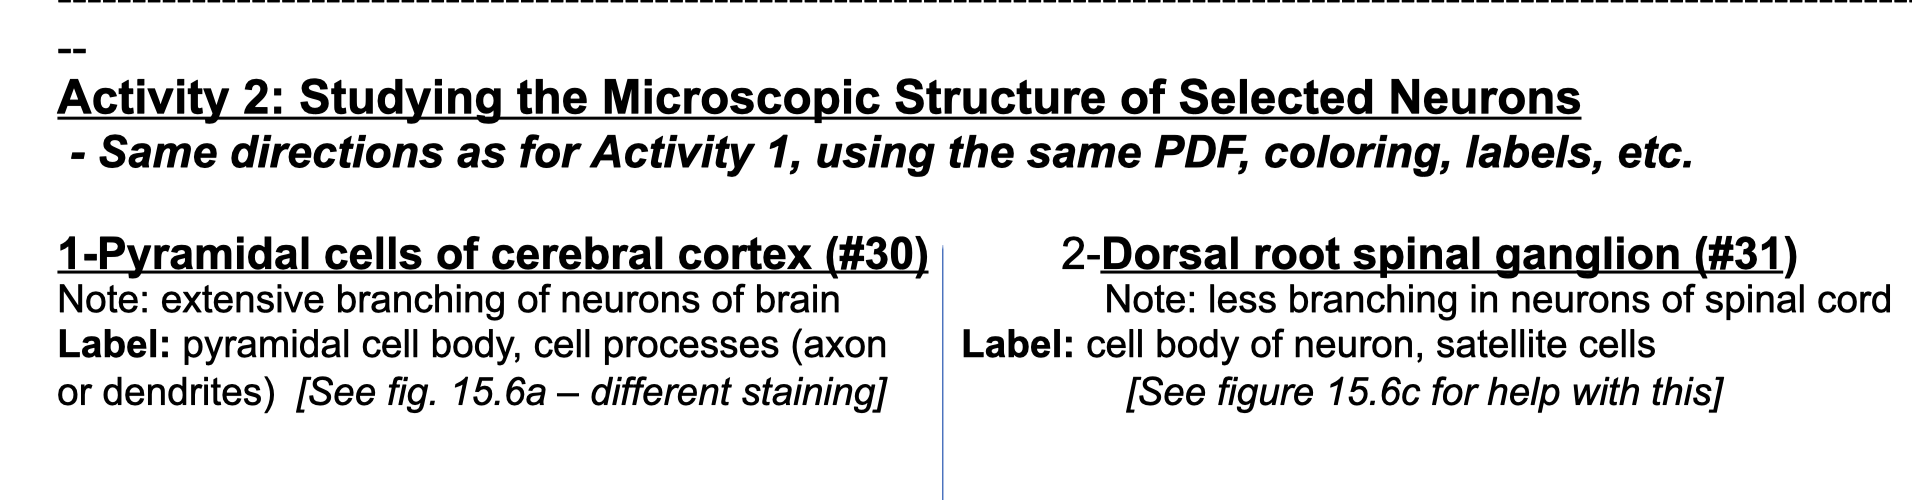 Activity 2: Studying the Microscopic Structure of Selected Neurons - Same directions as for Activity 1, using the same PDF, c